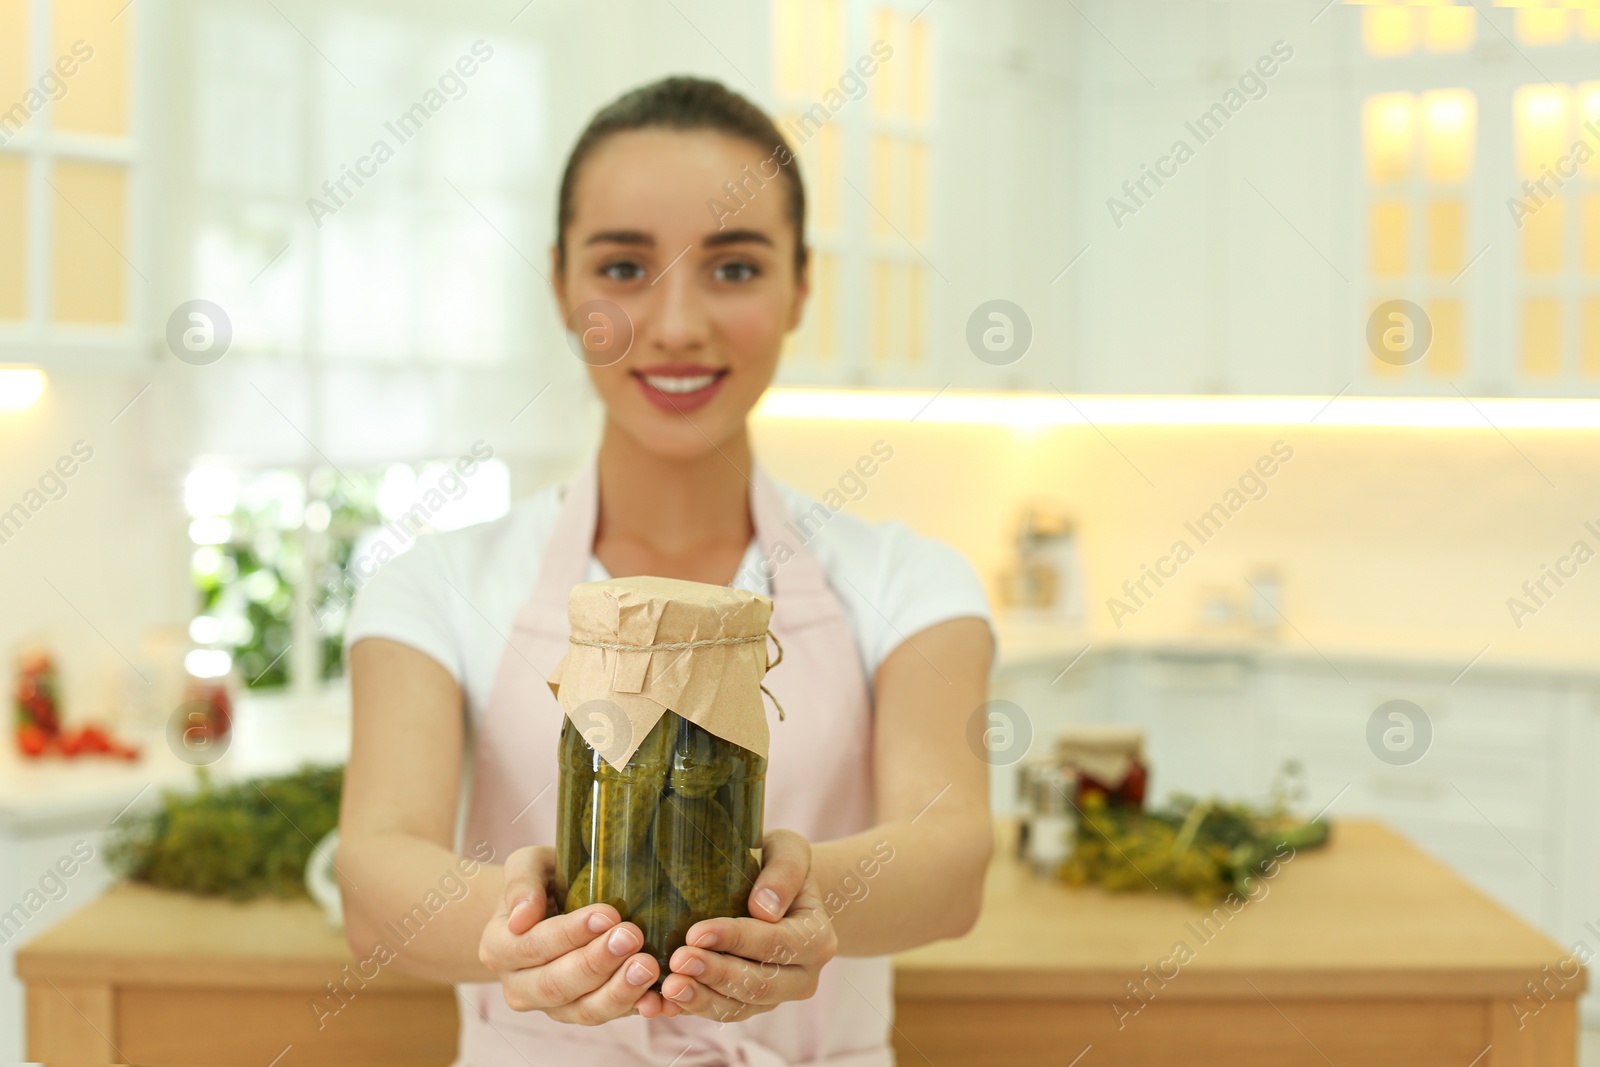 Photo of Woman holding jar of pickles in kitchen, focus on hands. Space for text